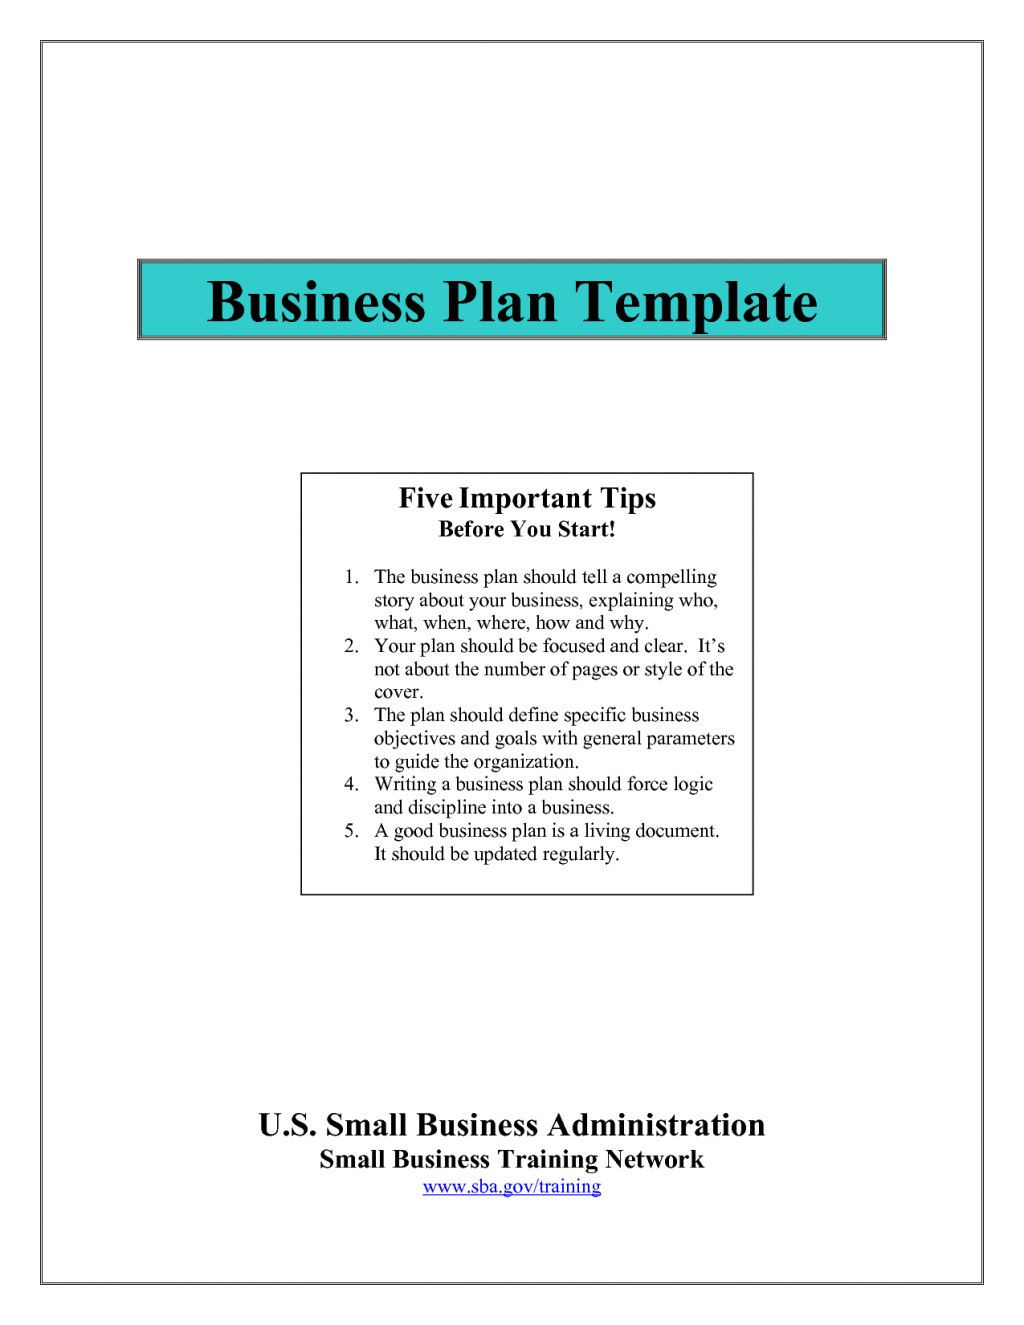 Small Business Administration Sample Plans Strategic Plan  Karaackerman with Small Business Administration Business Plan Template